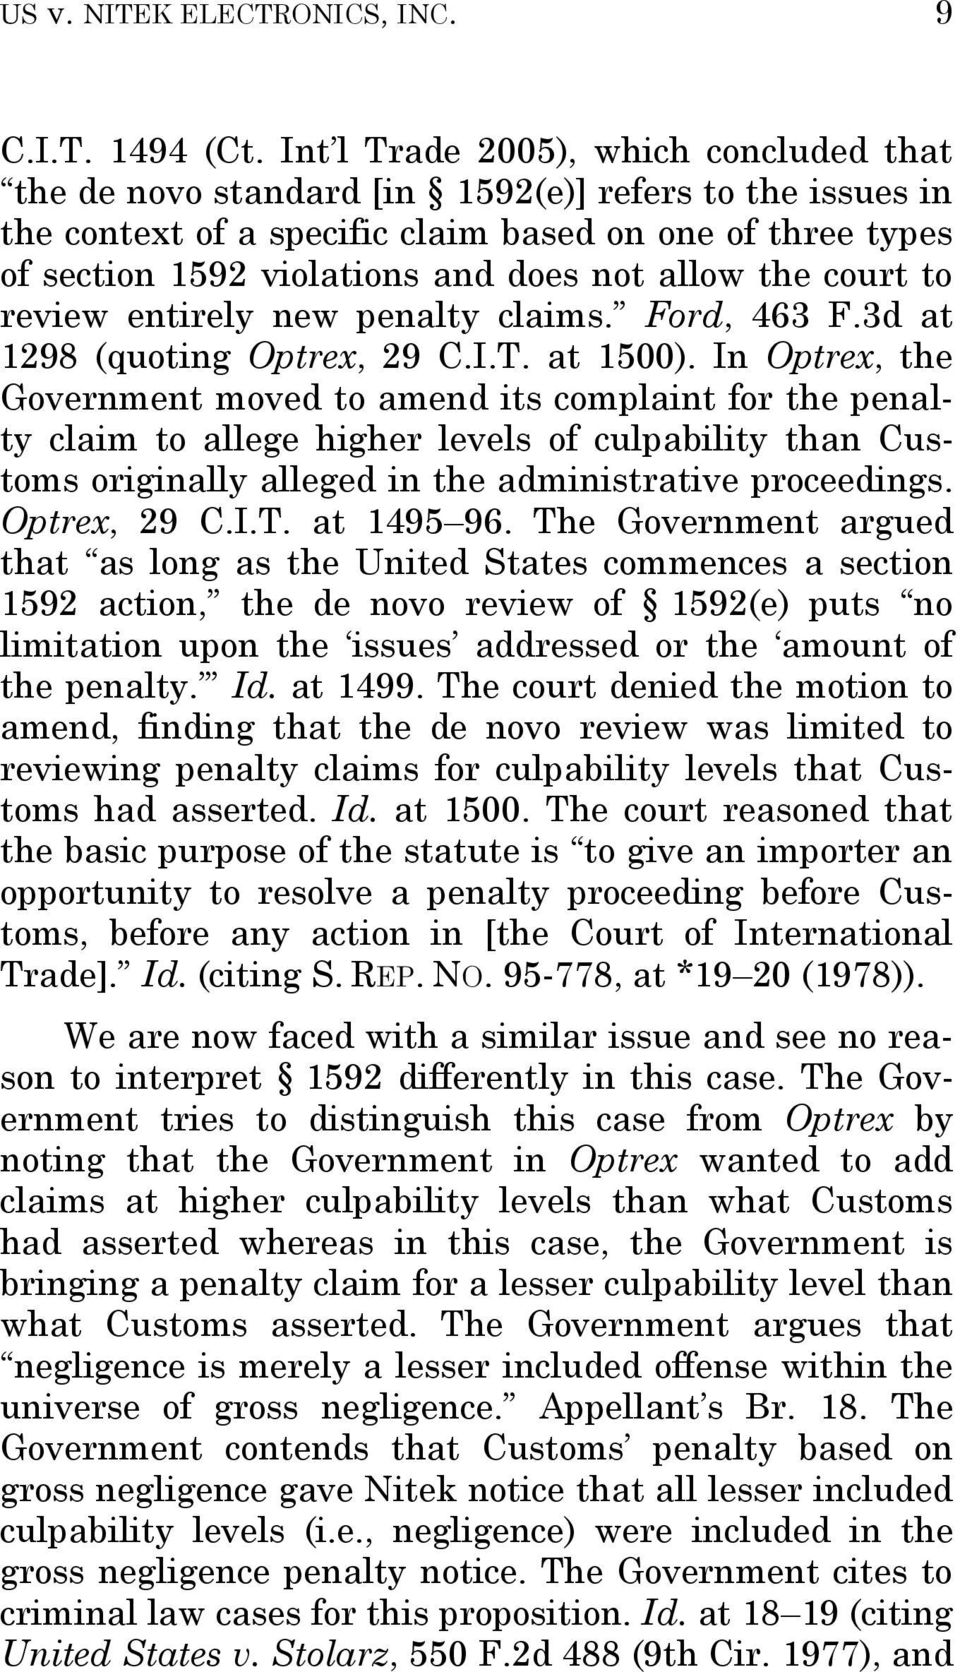 allow the court to review entirely new penalty claims. Ford, 463 F.3d at 1298 (quoting Optrex, 29 C.I.T. at 1500).